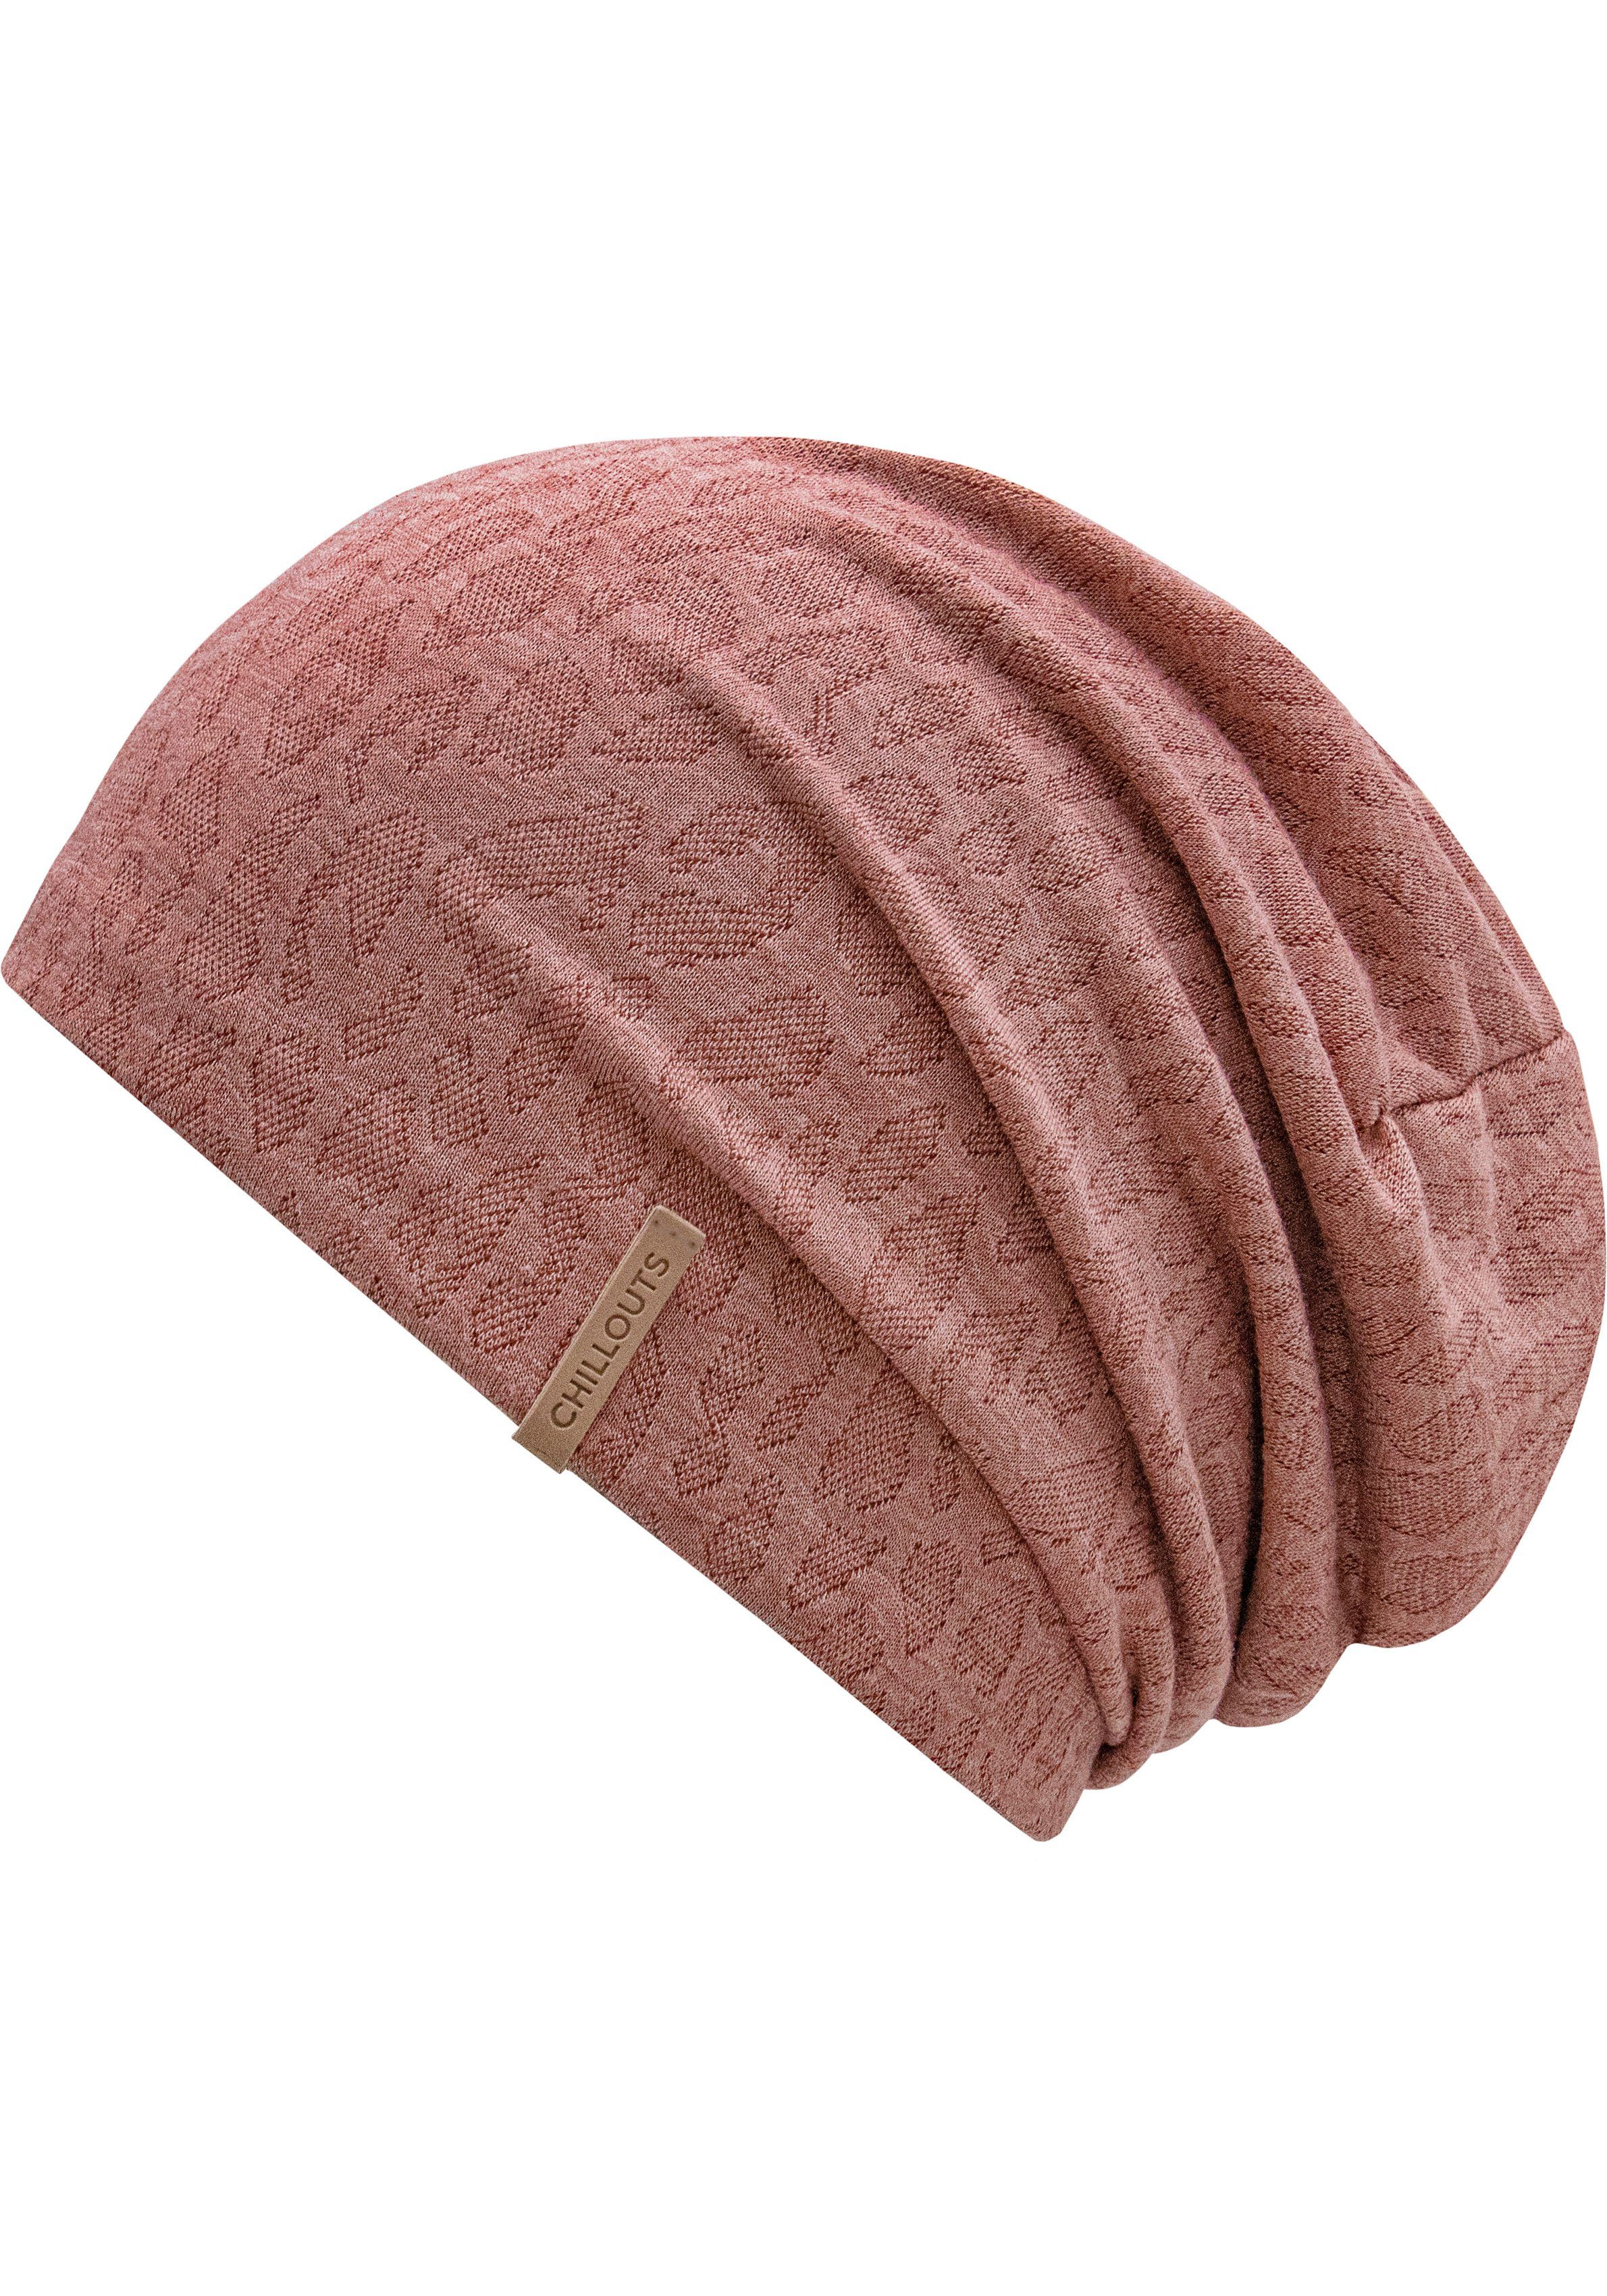 chillouts Beanie Rochester Hat terracotta